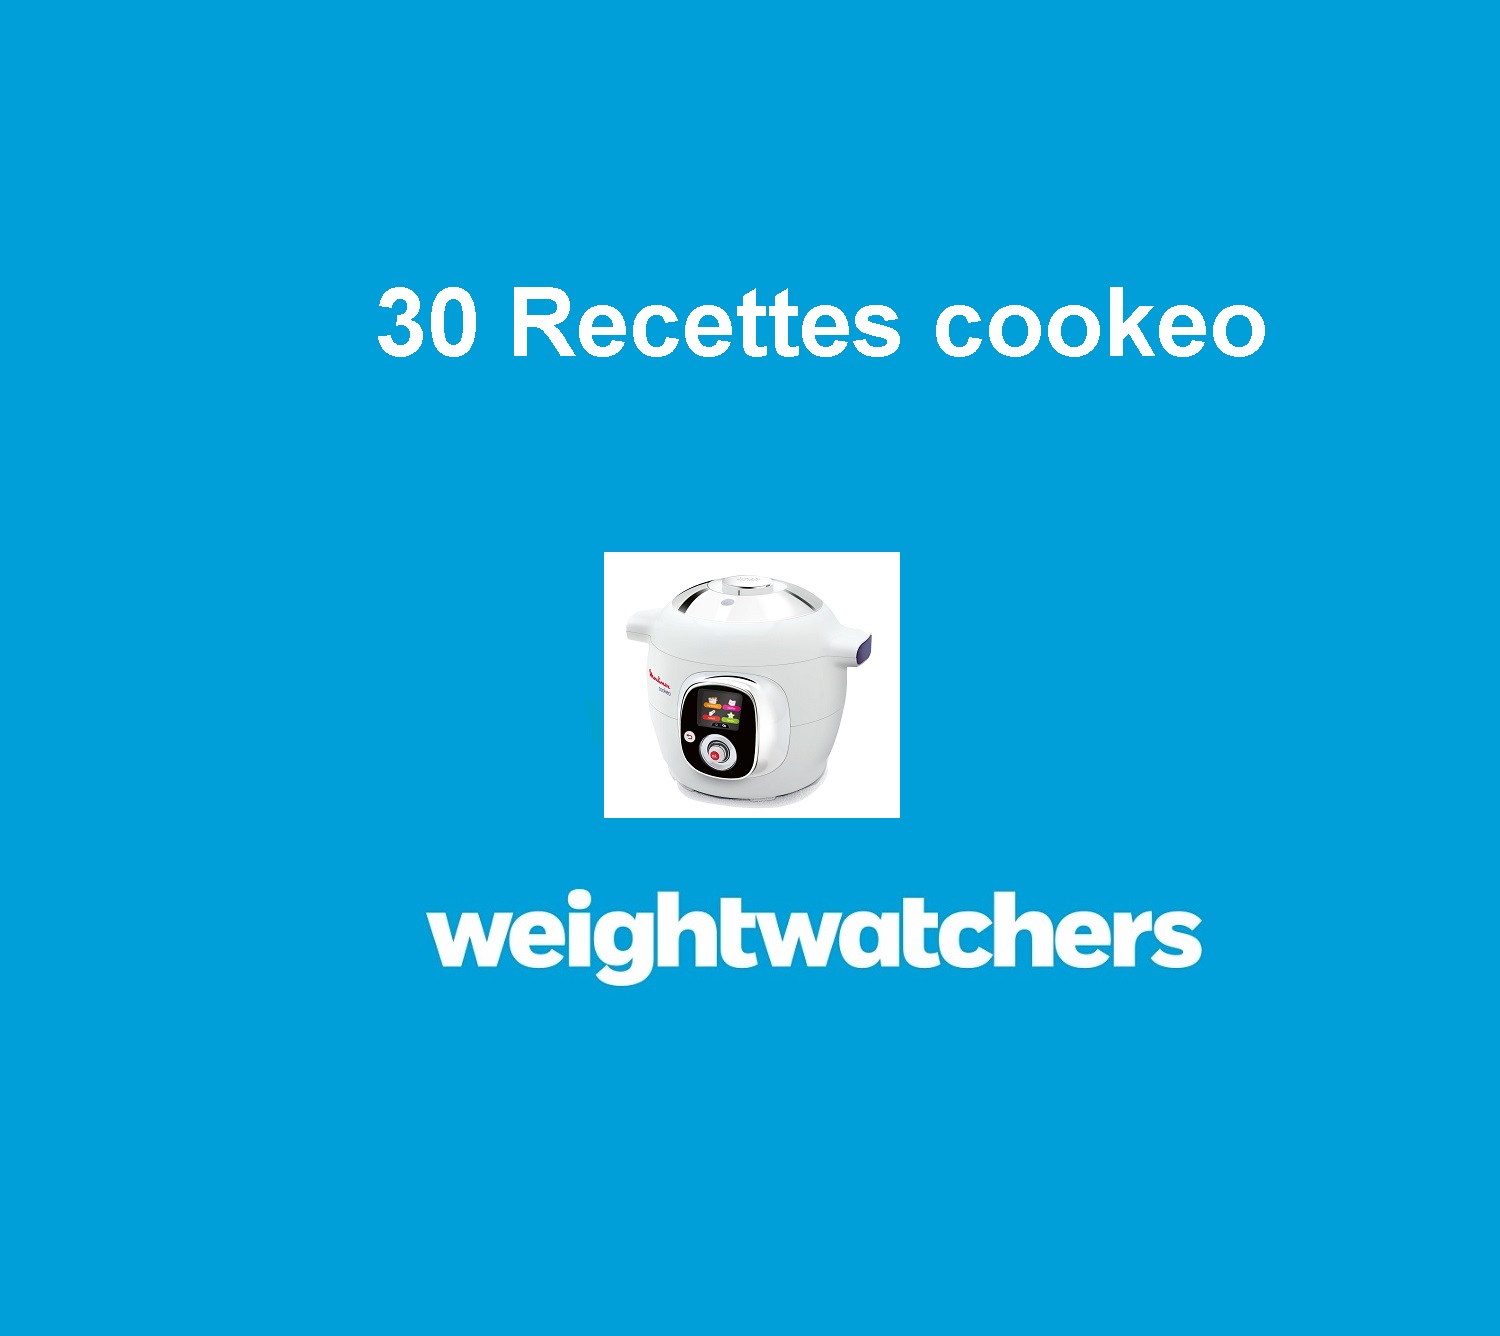 30 recettes cookeo weight watchers